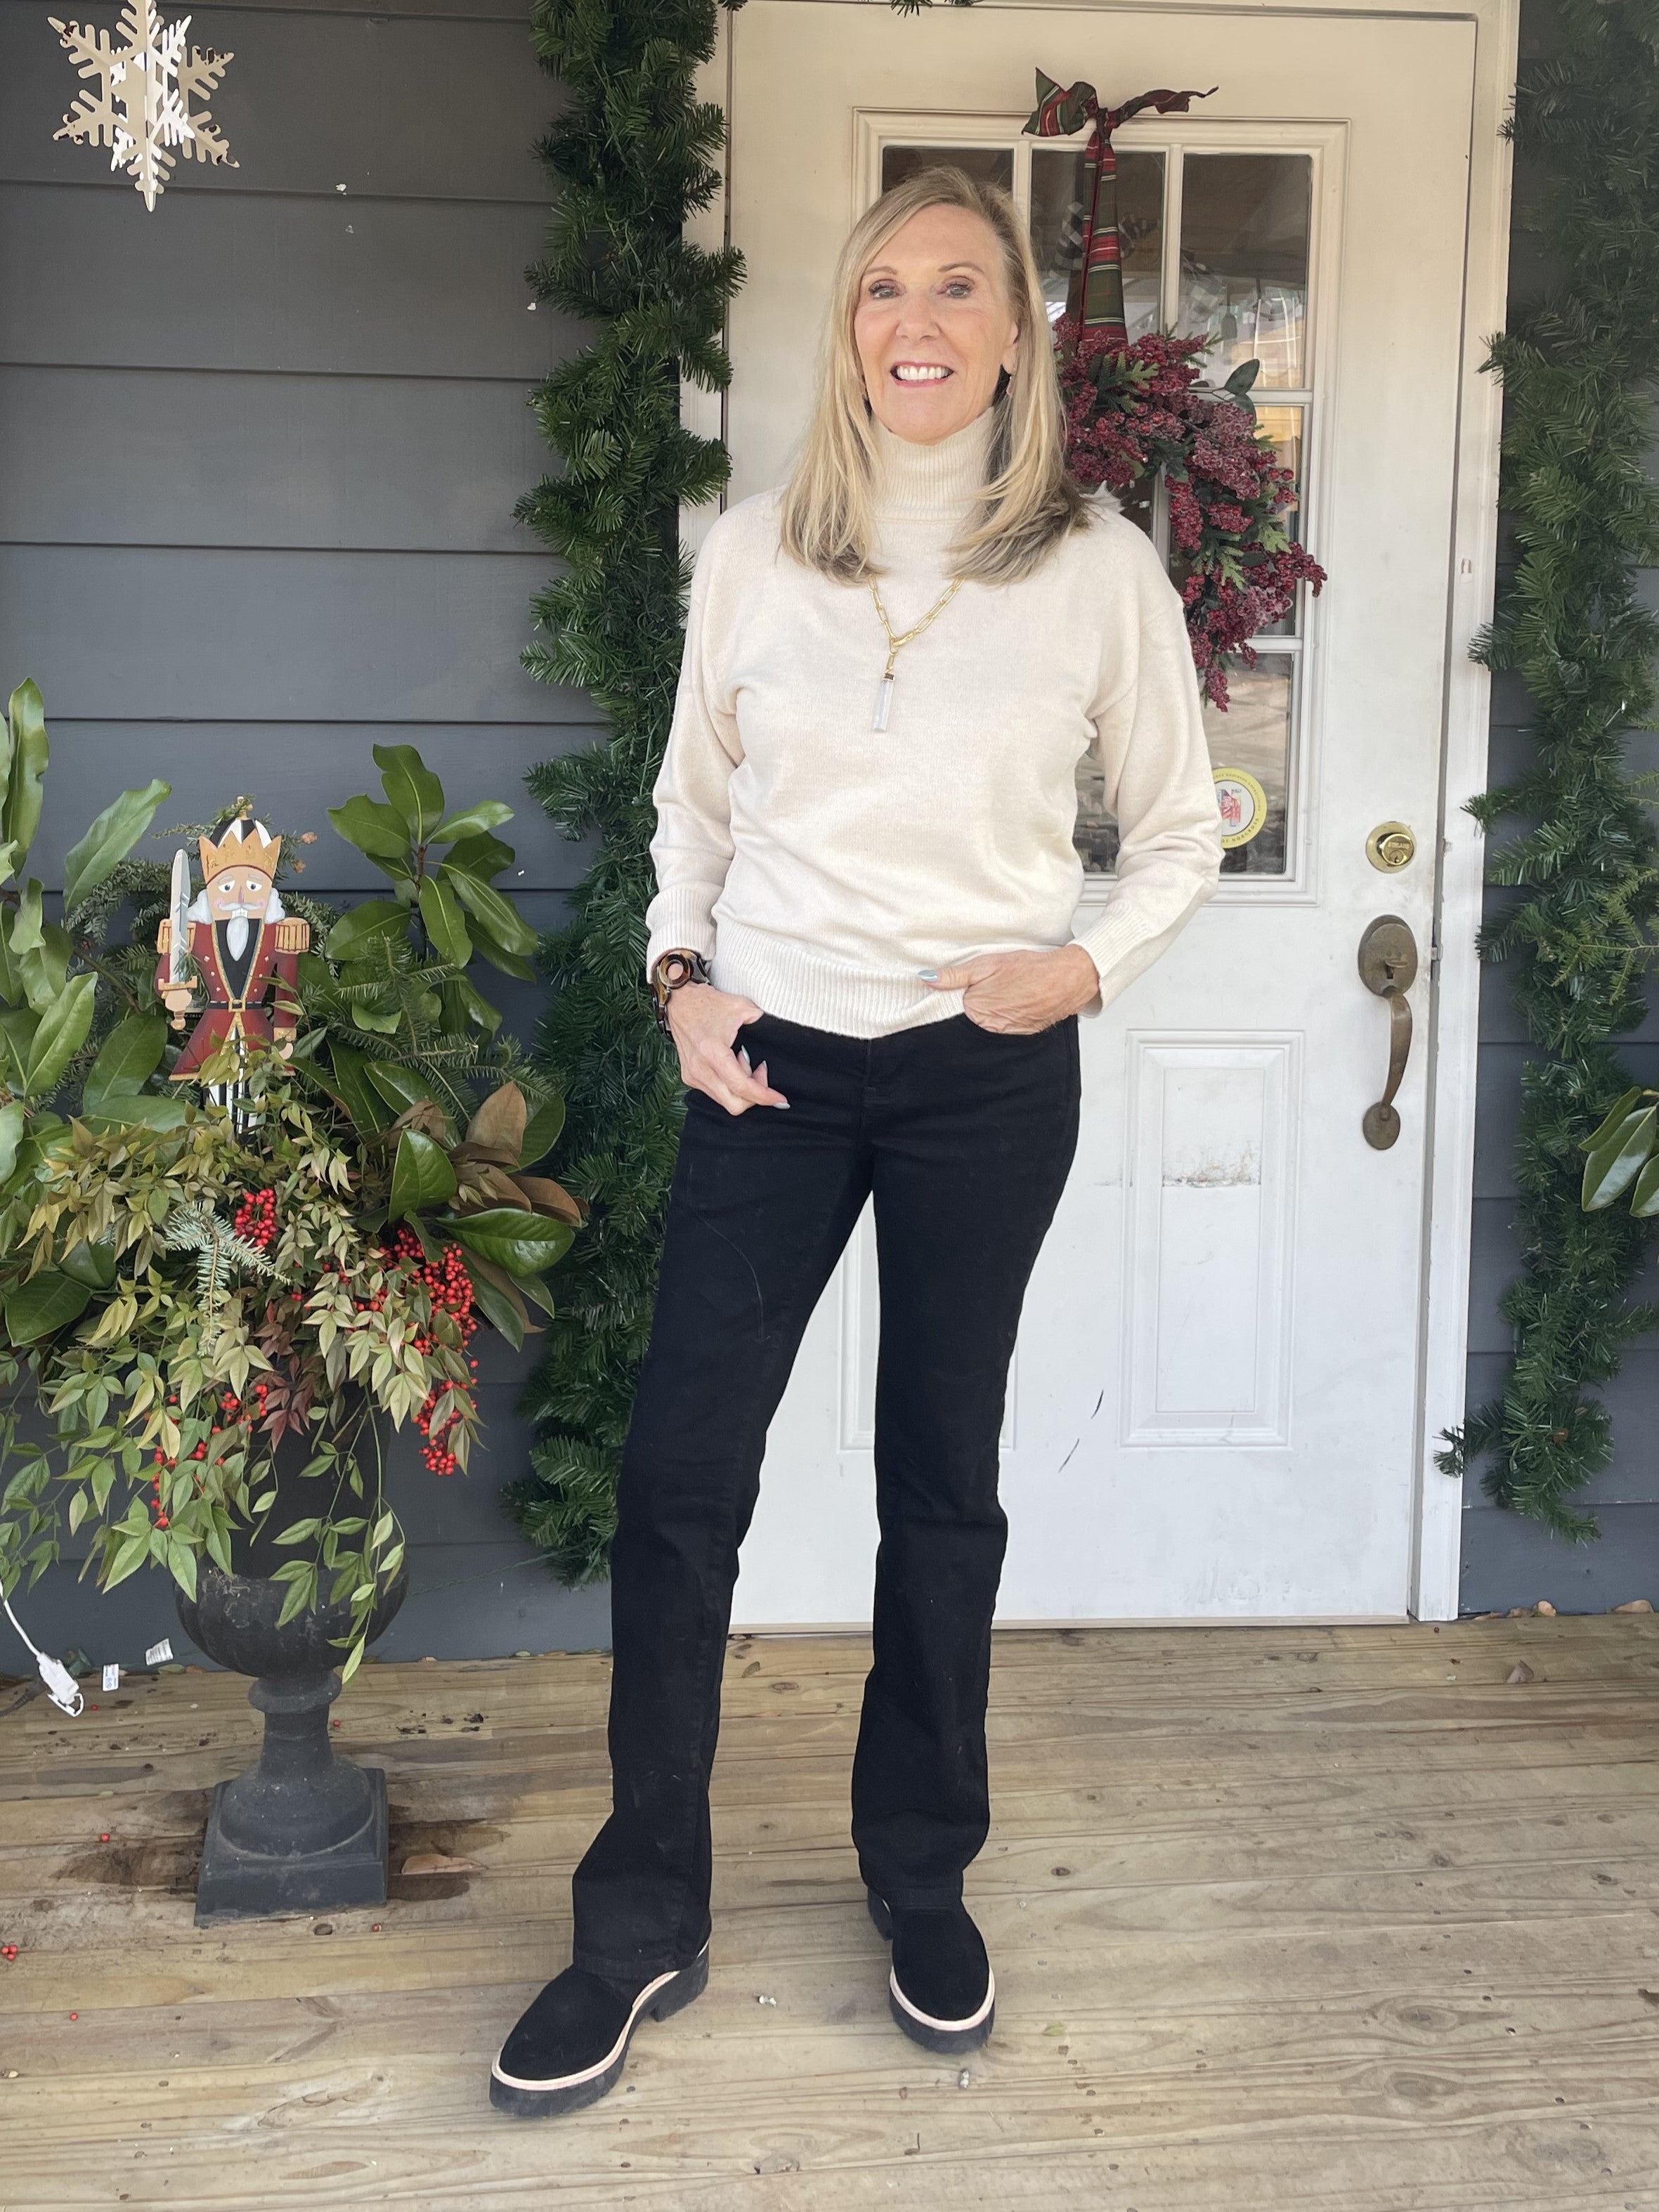 This Mock Neck Sweater is the perfect wardrobe staple! With a classic mock neck, it transitions easily from season to season. Made of lightweight fabric, it's great for layering and will keep you cozy and comfortable all day long.  One Size Fits Most  Material: 58% Acrylic / 27% Nylon / 10% Wool  Care Instructions: Hand wash cold, hang/flat dry